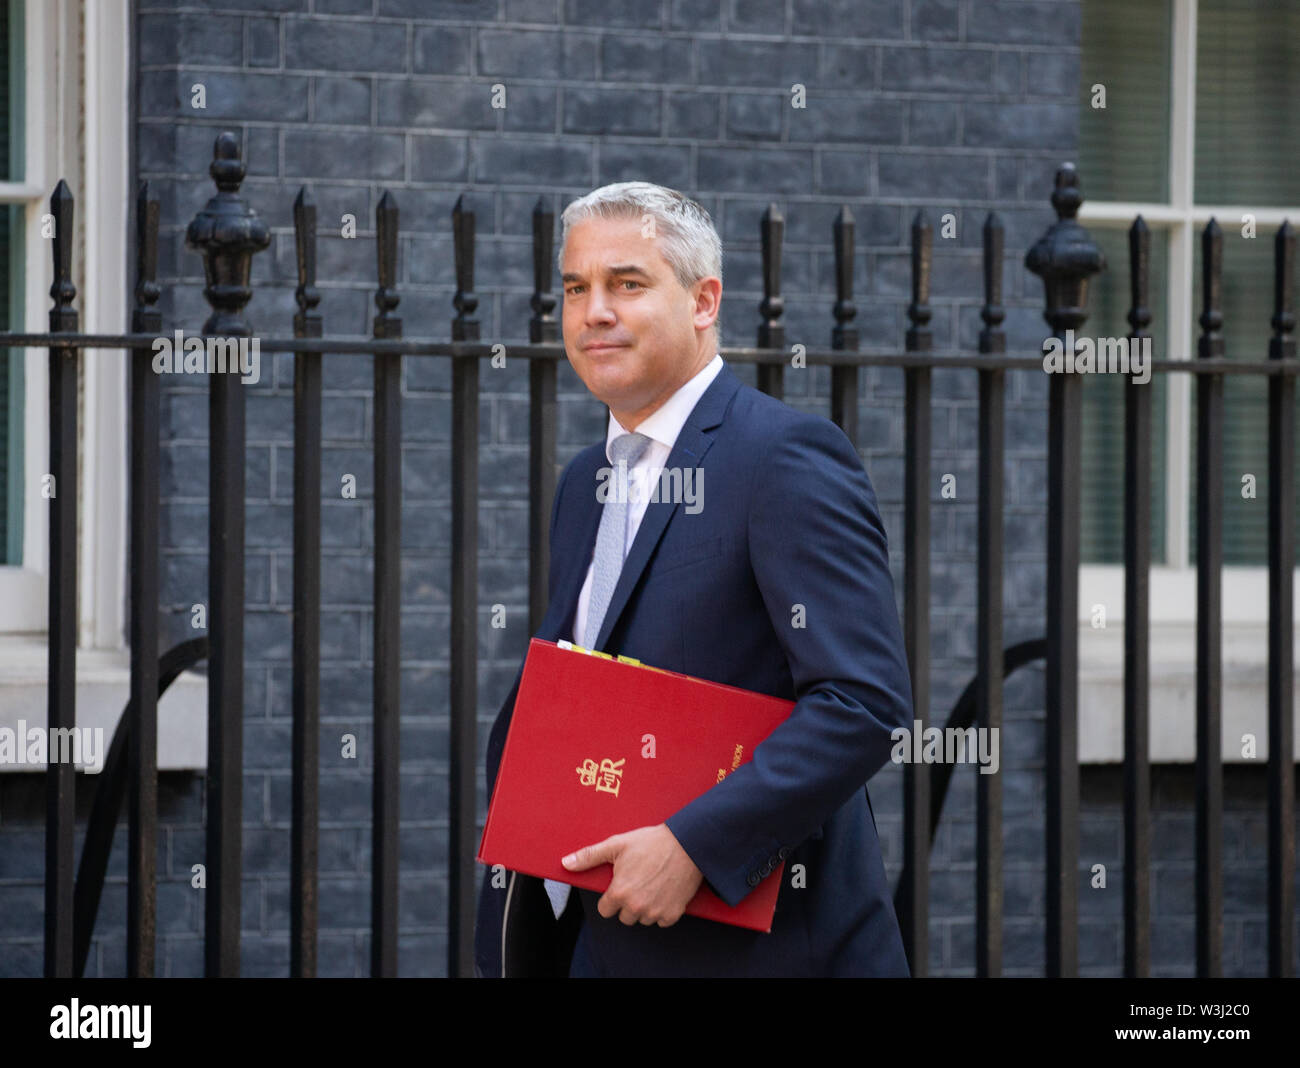 London, UK. 16th July, 2019. Stephen Barclay, Brexit Secretary, arrives for the Cabinet meeting. Theresa May is chairing possibly her final Cabinet meeting before she steps down on July 24th. Credit: Tommy London/Alamy Live News Stock Photo